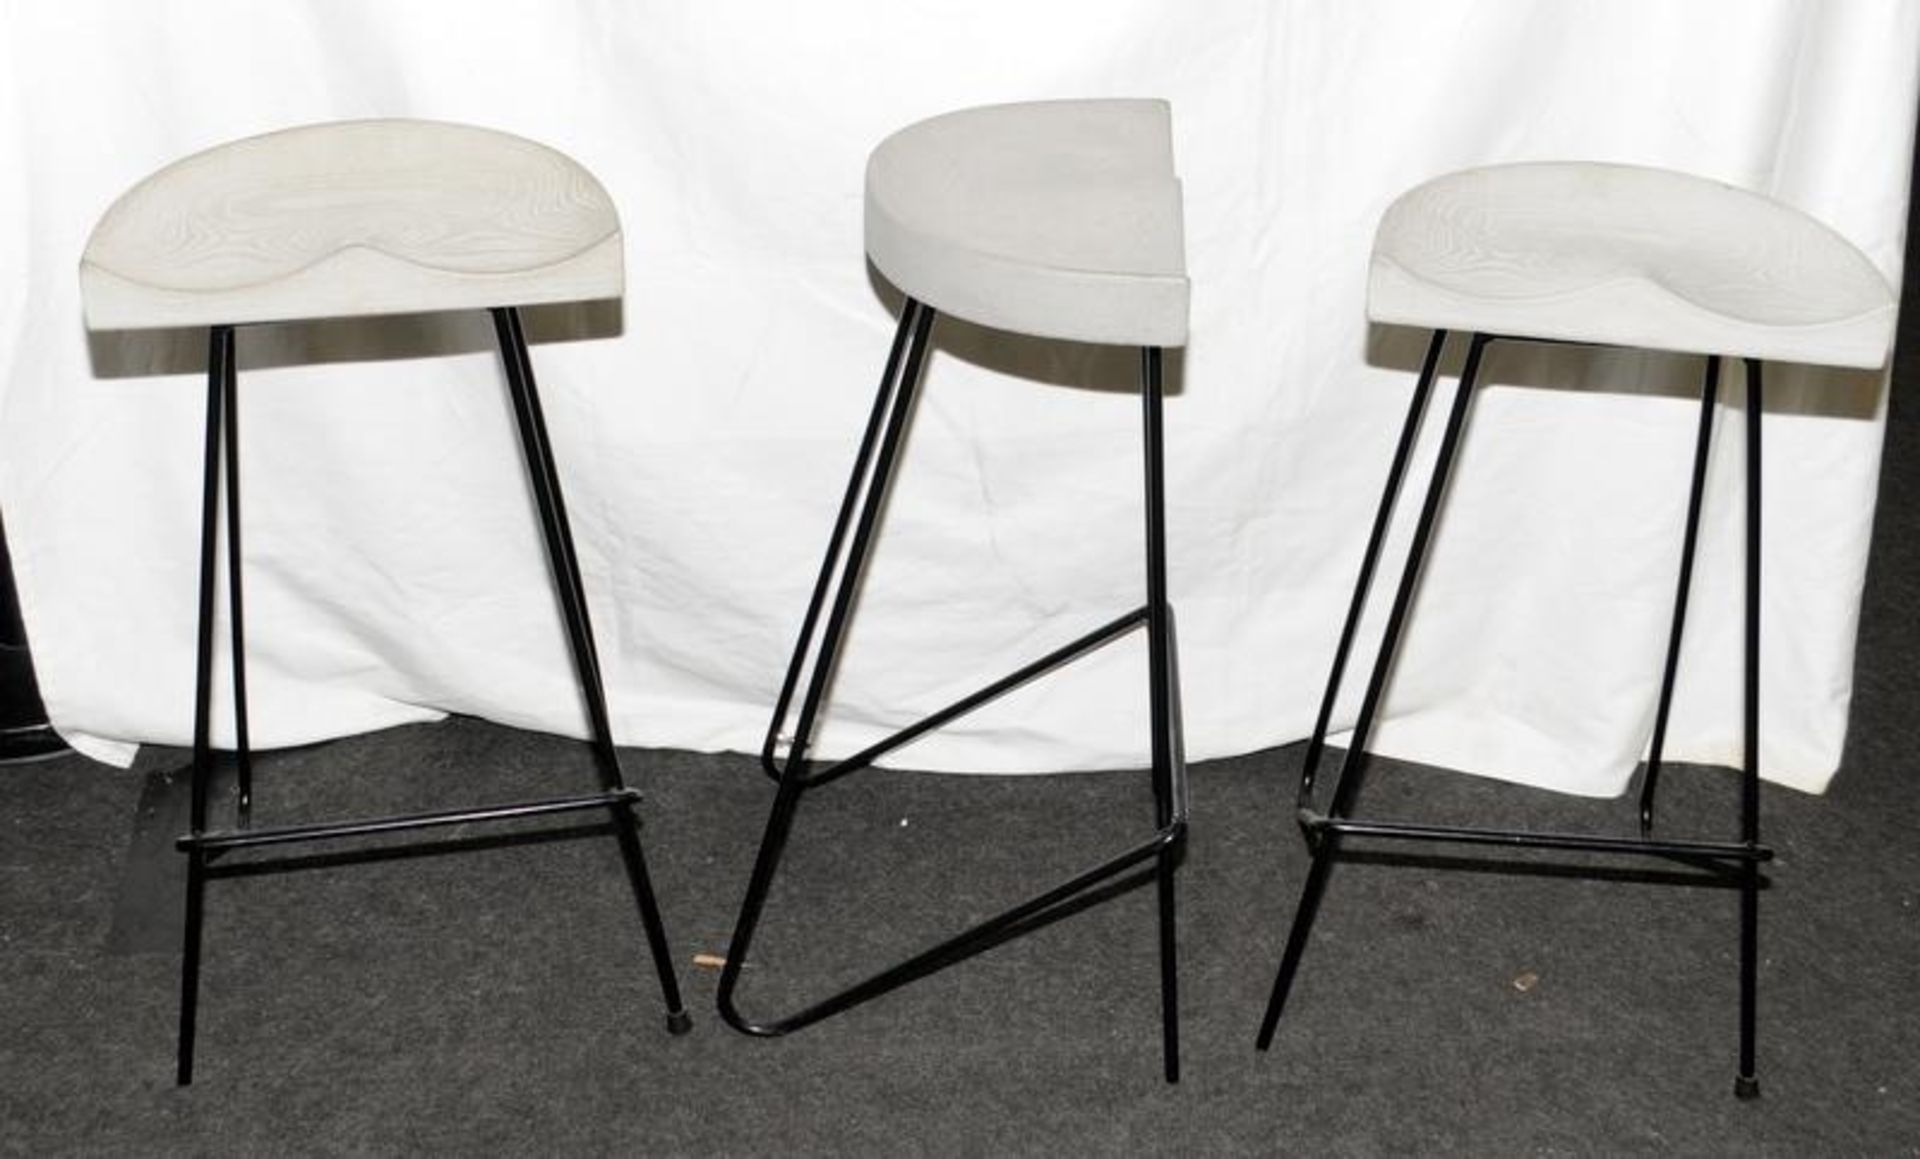 3 Concrete bar chairs by InNostyles 70cm x 40cm x40cm - Image 2 of 4